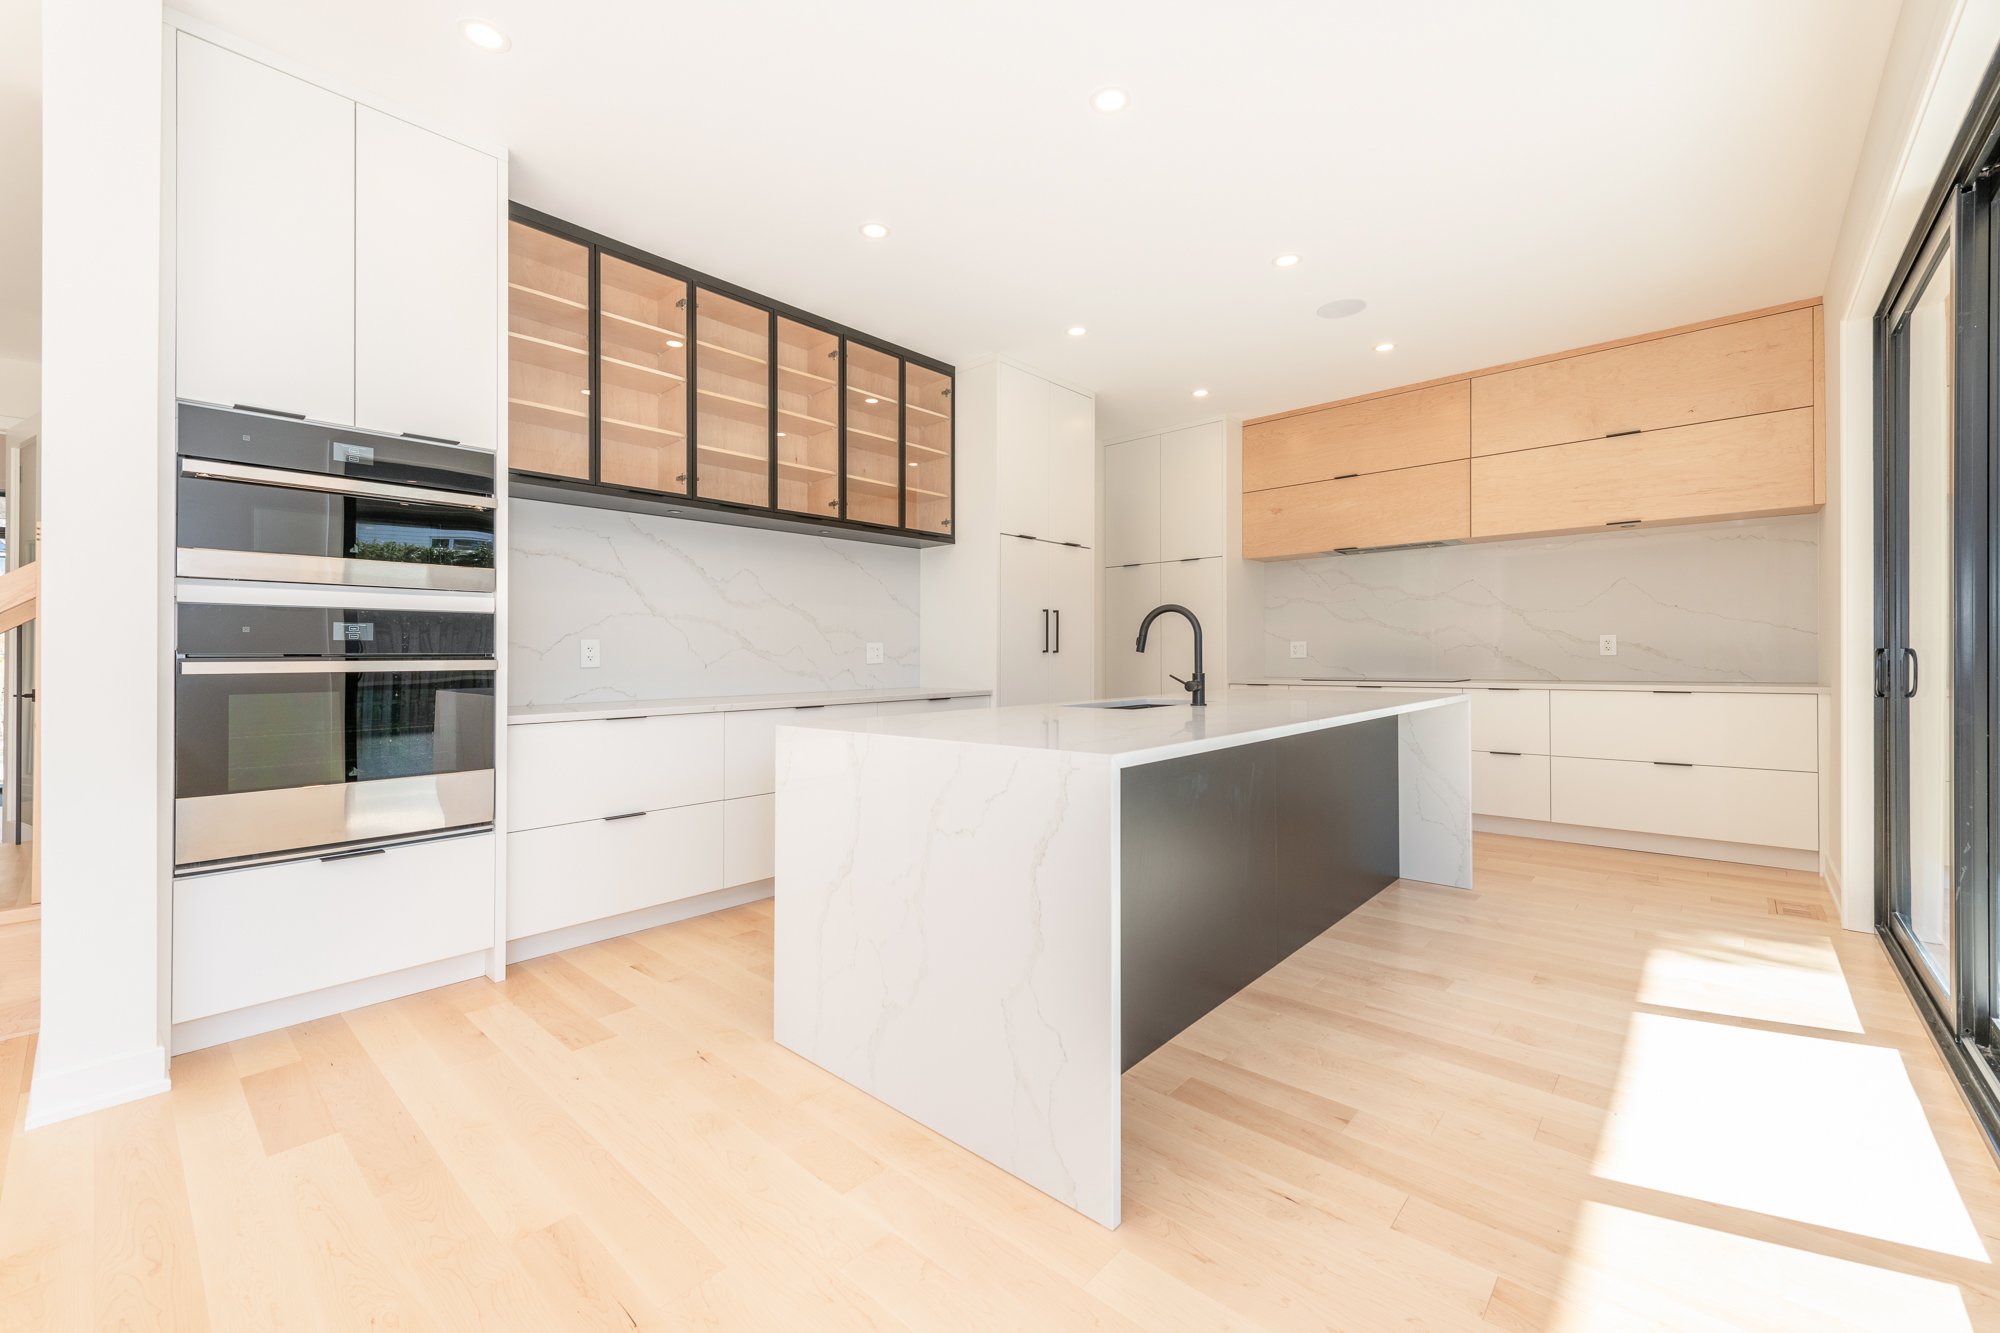 A brand-new kitchen by Deslaurier with empty shelving.